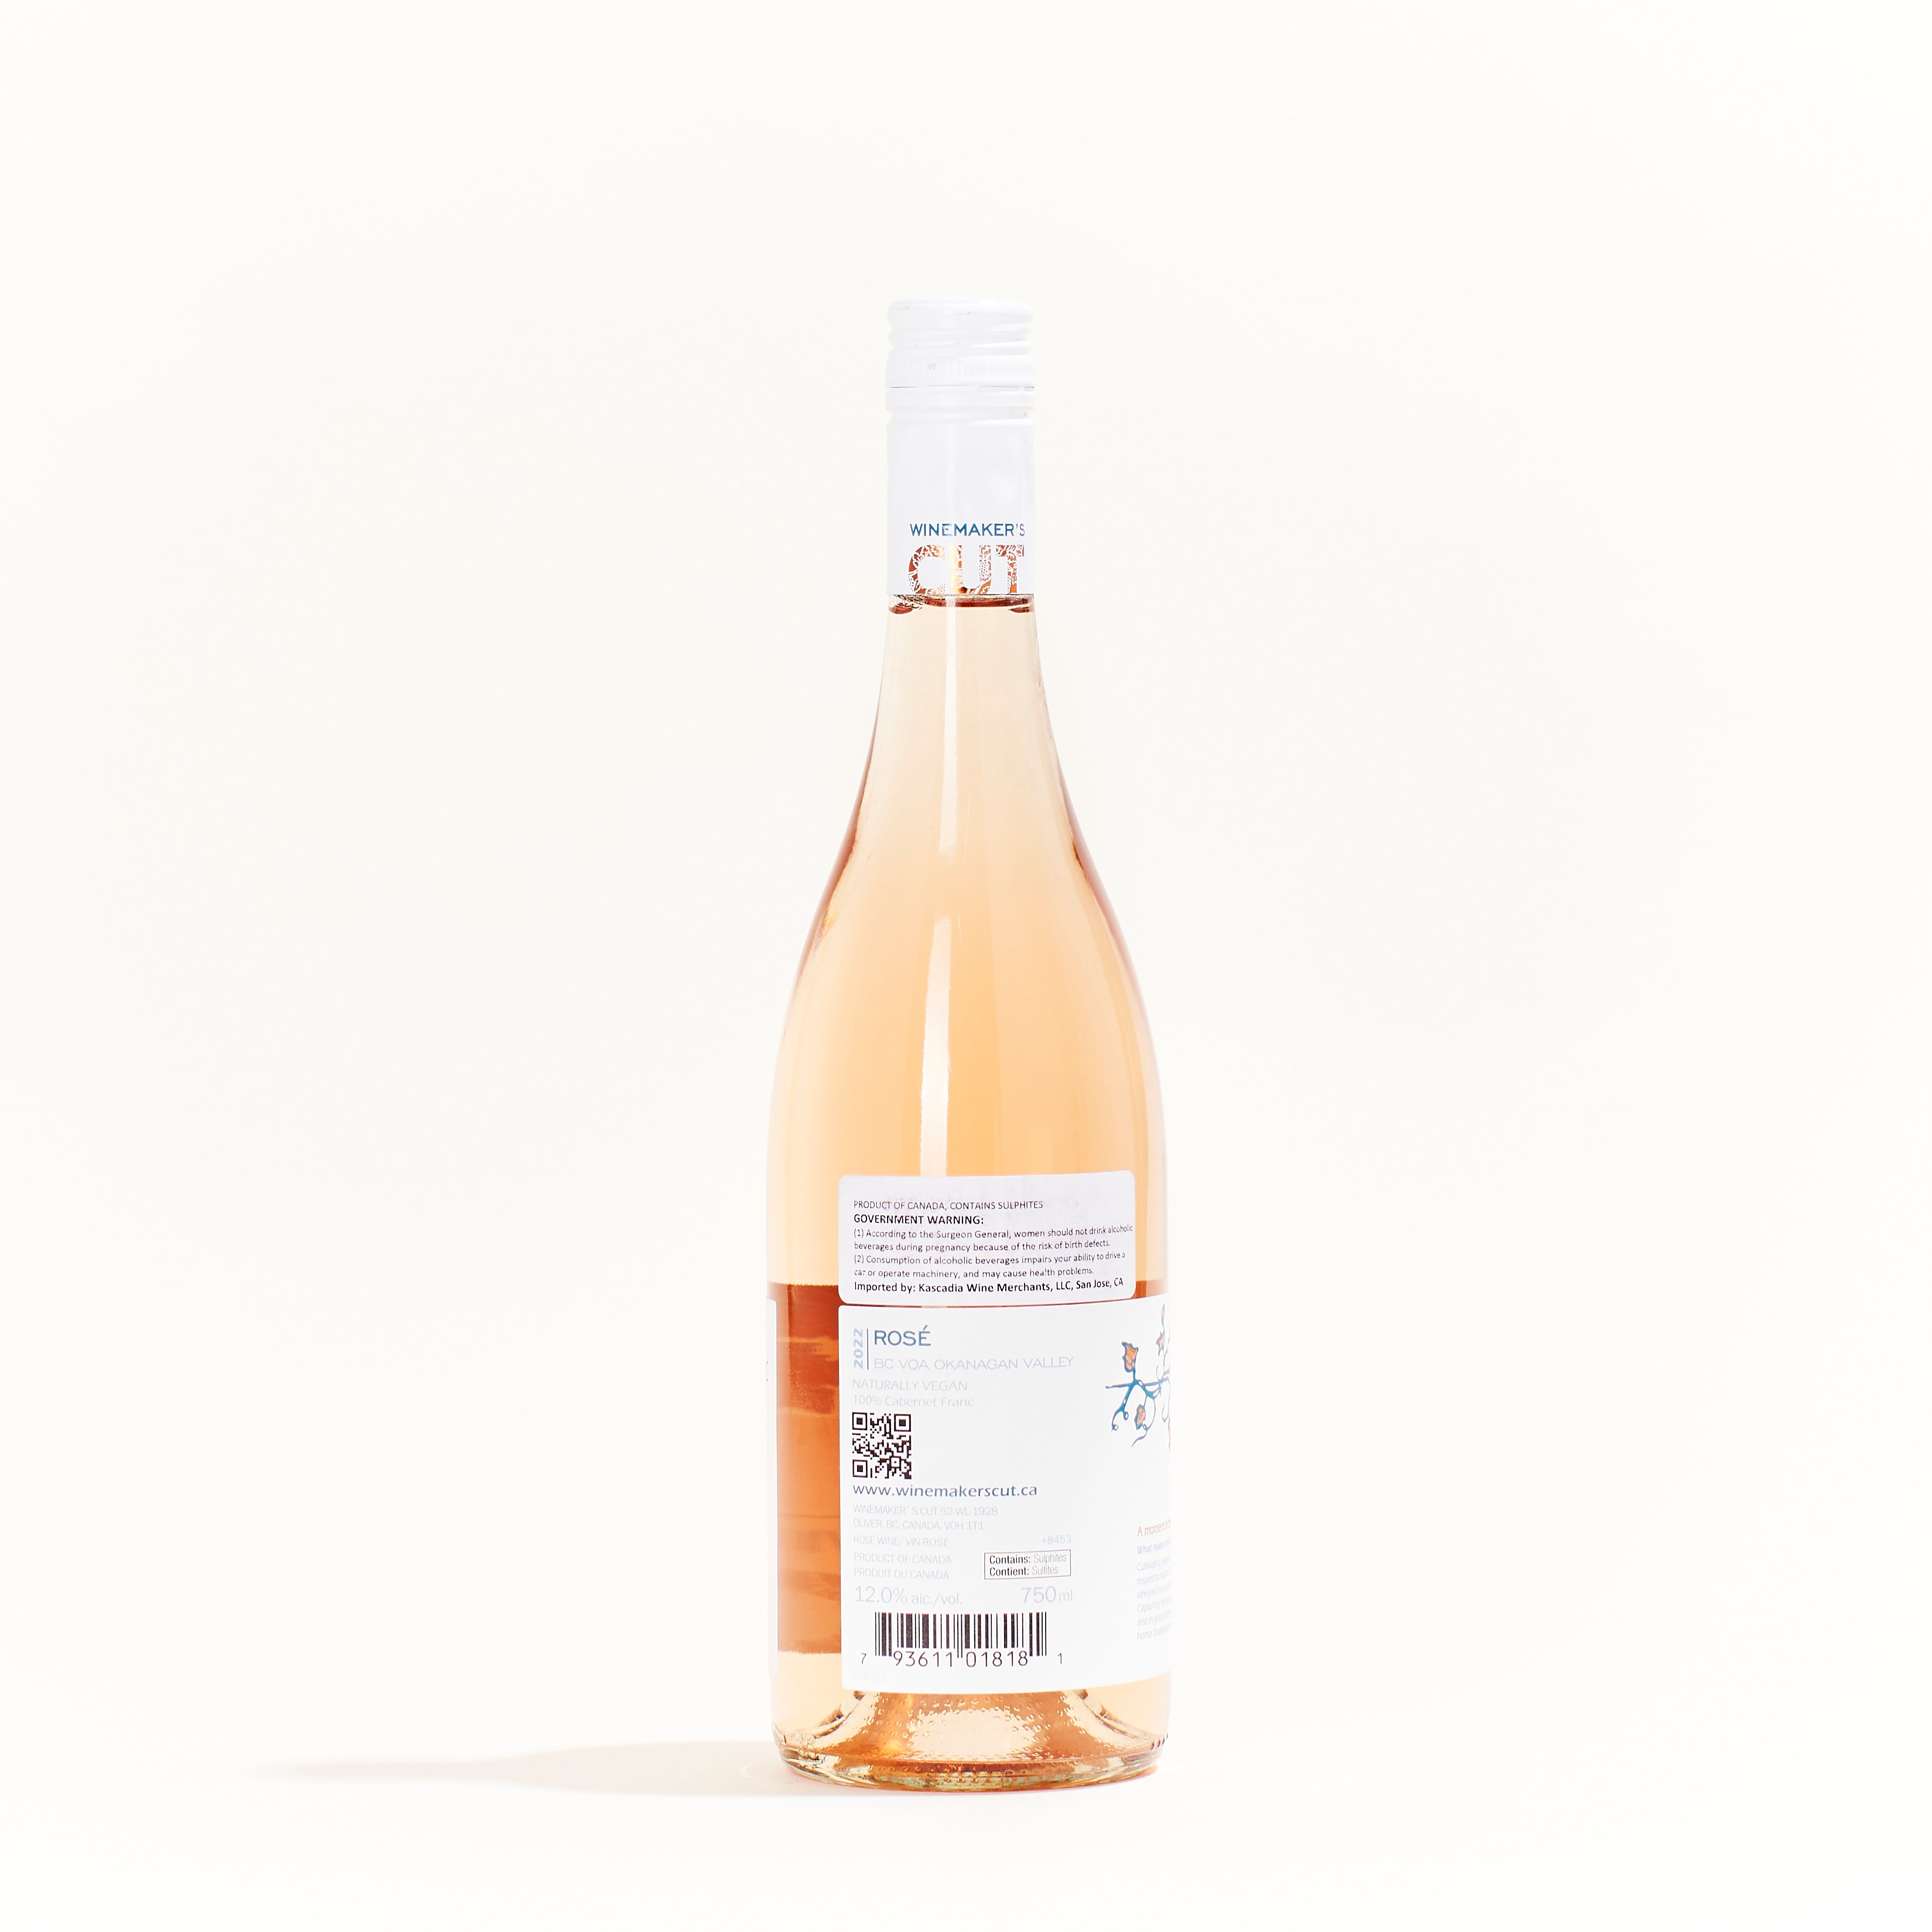 Okanagan Valley Rosé, by Winemaker's CUT, made from Cabernet Franc is a natural Rosé Wine from Okanagan Valley, Canada.